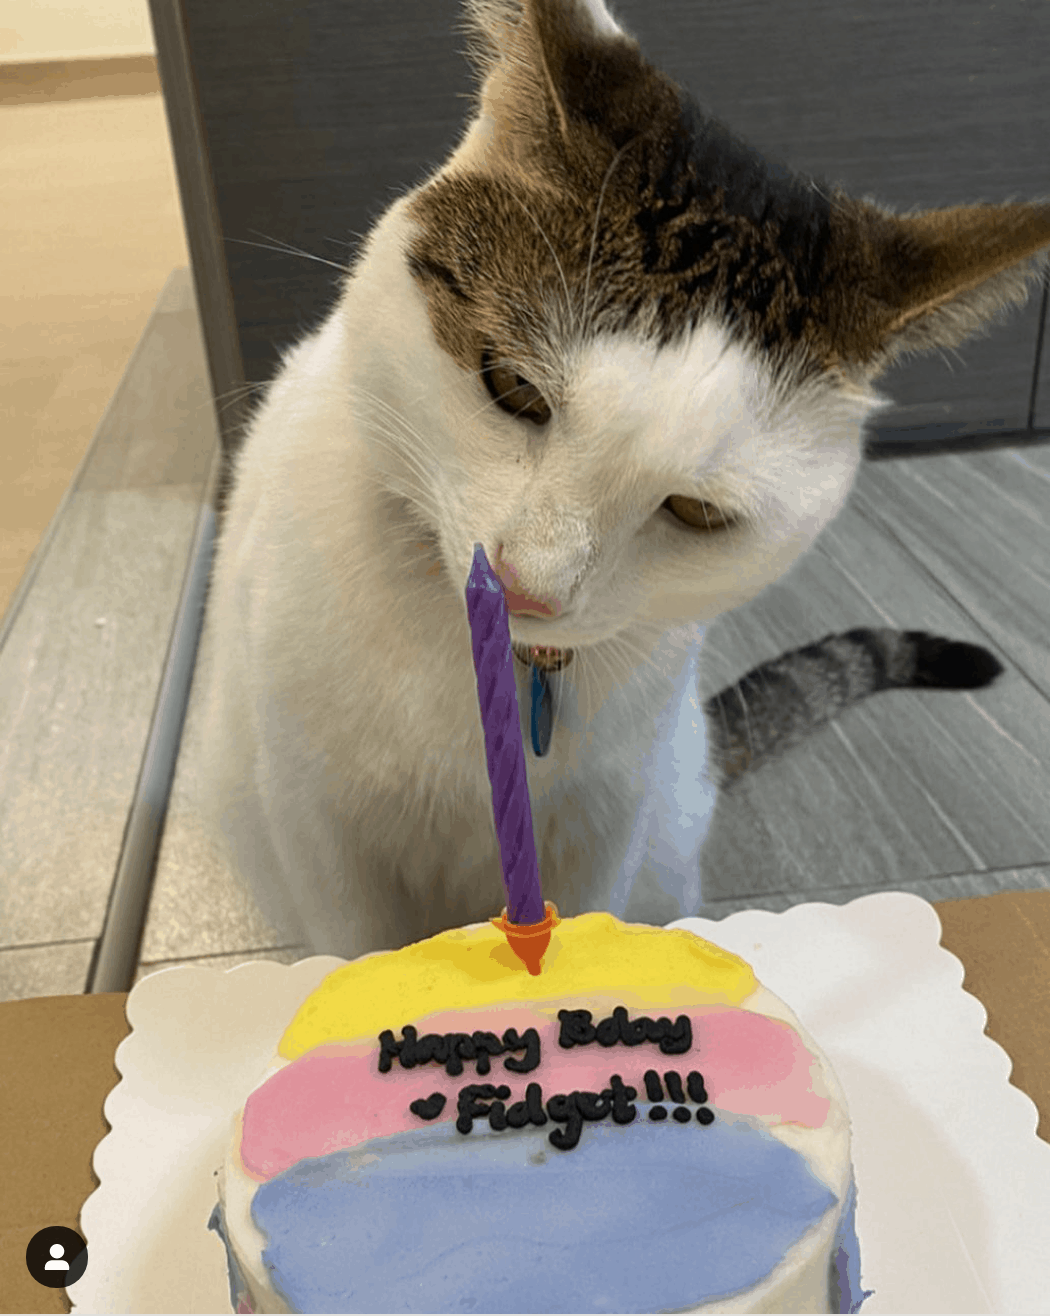 CATS LOVE CAKE - Play this Free Online Game Now! | Poki